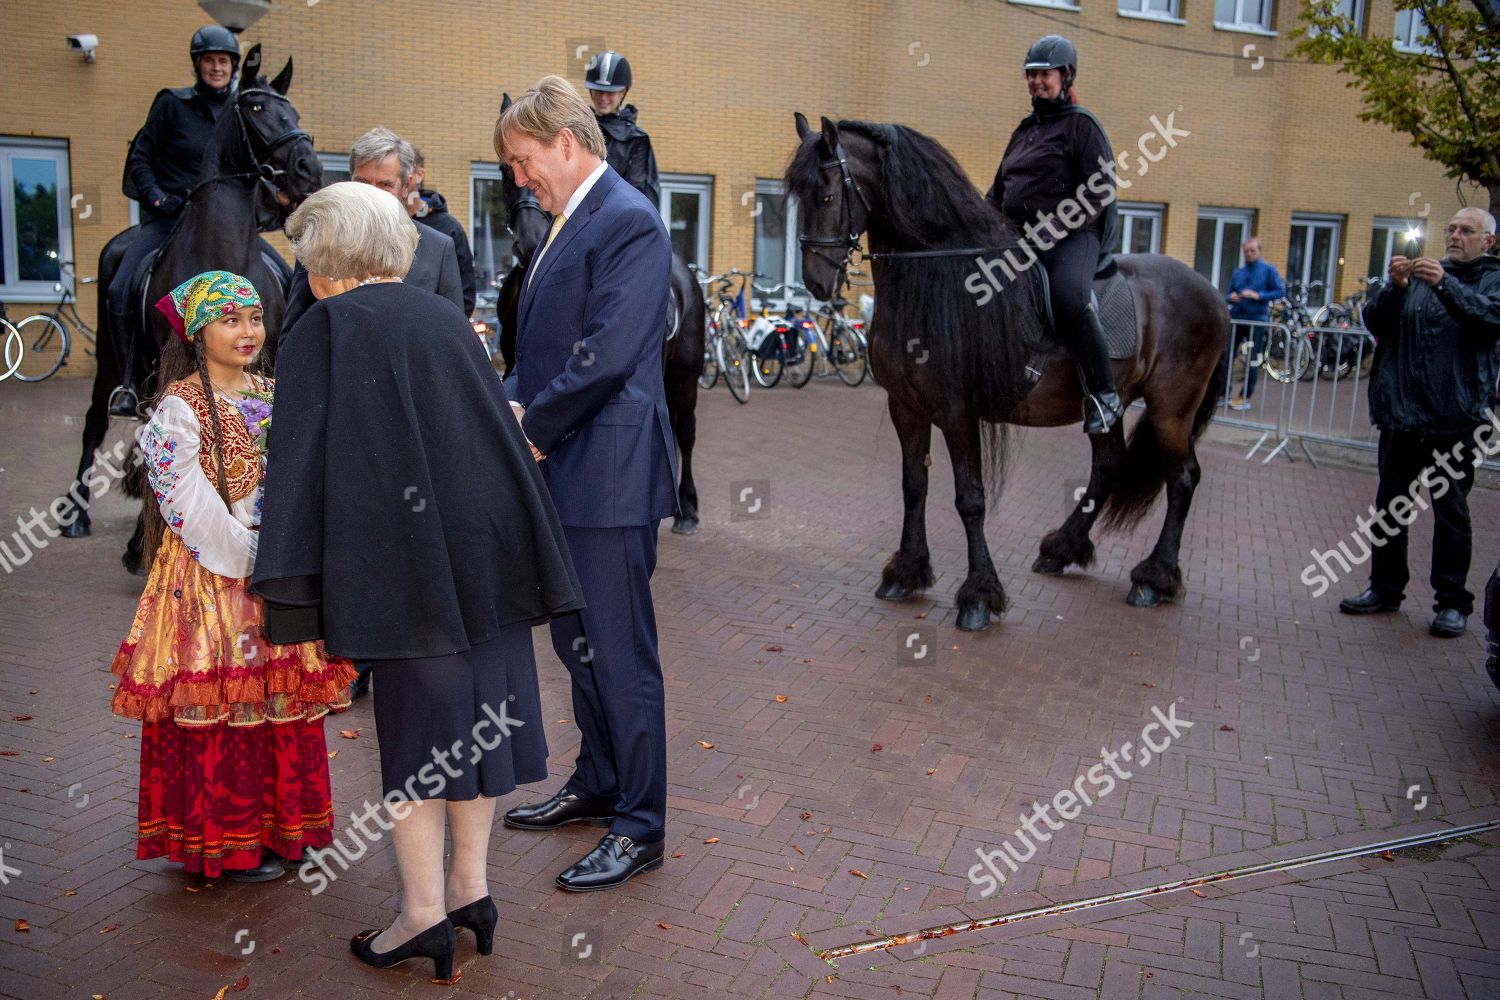 princess-beatrix-and-king-willem-alexander-at-the-premiere-of-theater-production-de-stormruiter-leeuwarde-the-netherlands-shutterstock-editorial-9877562as.jpg